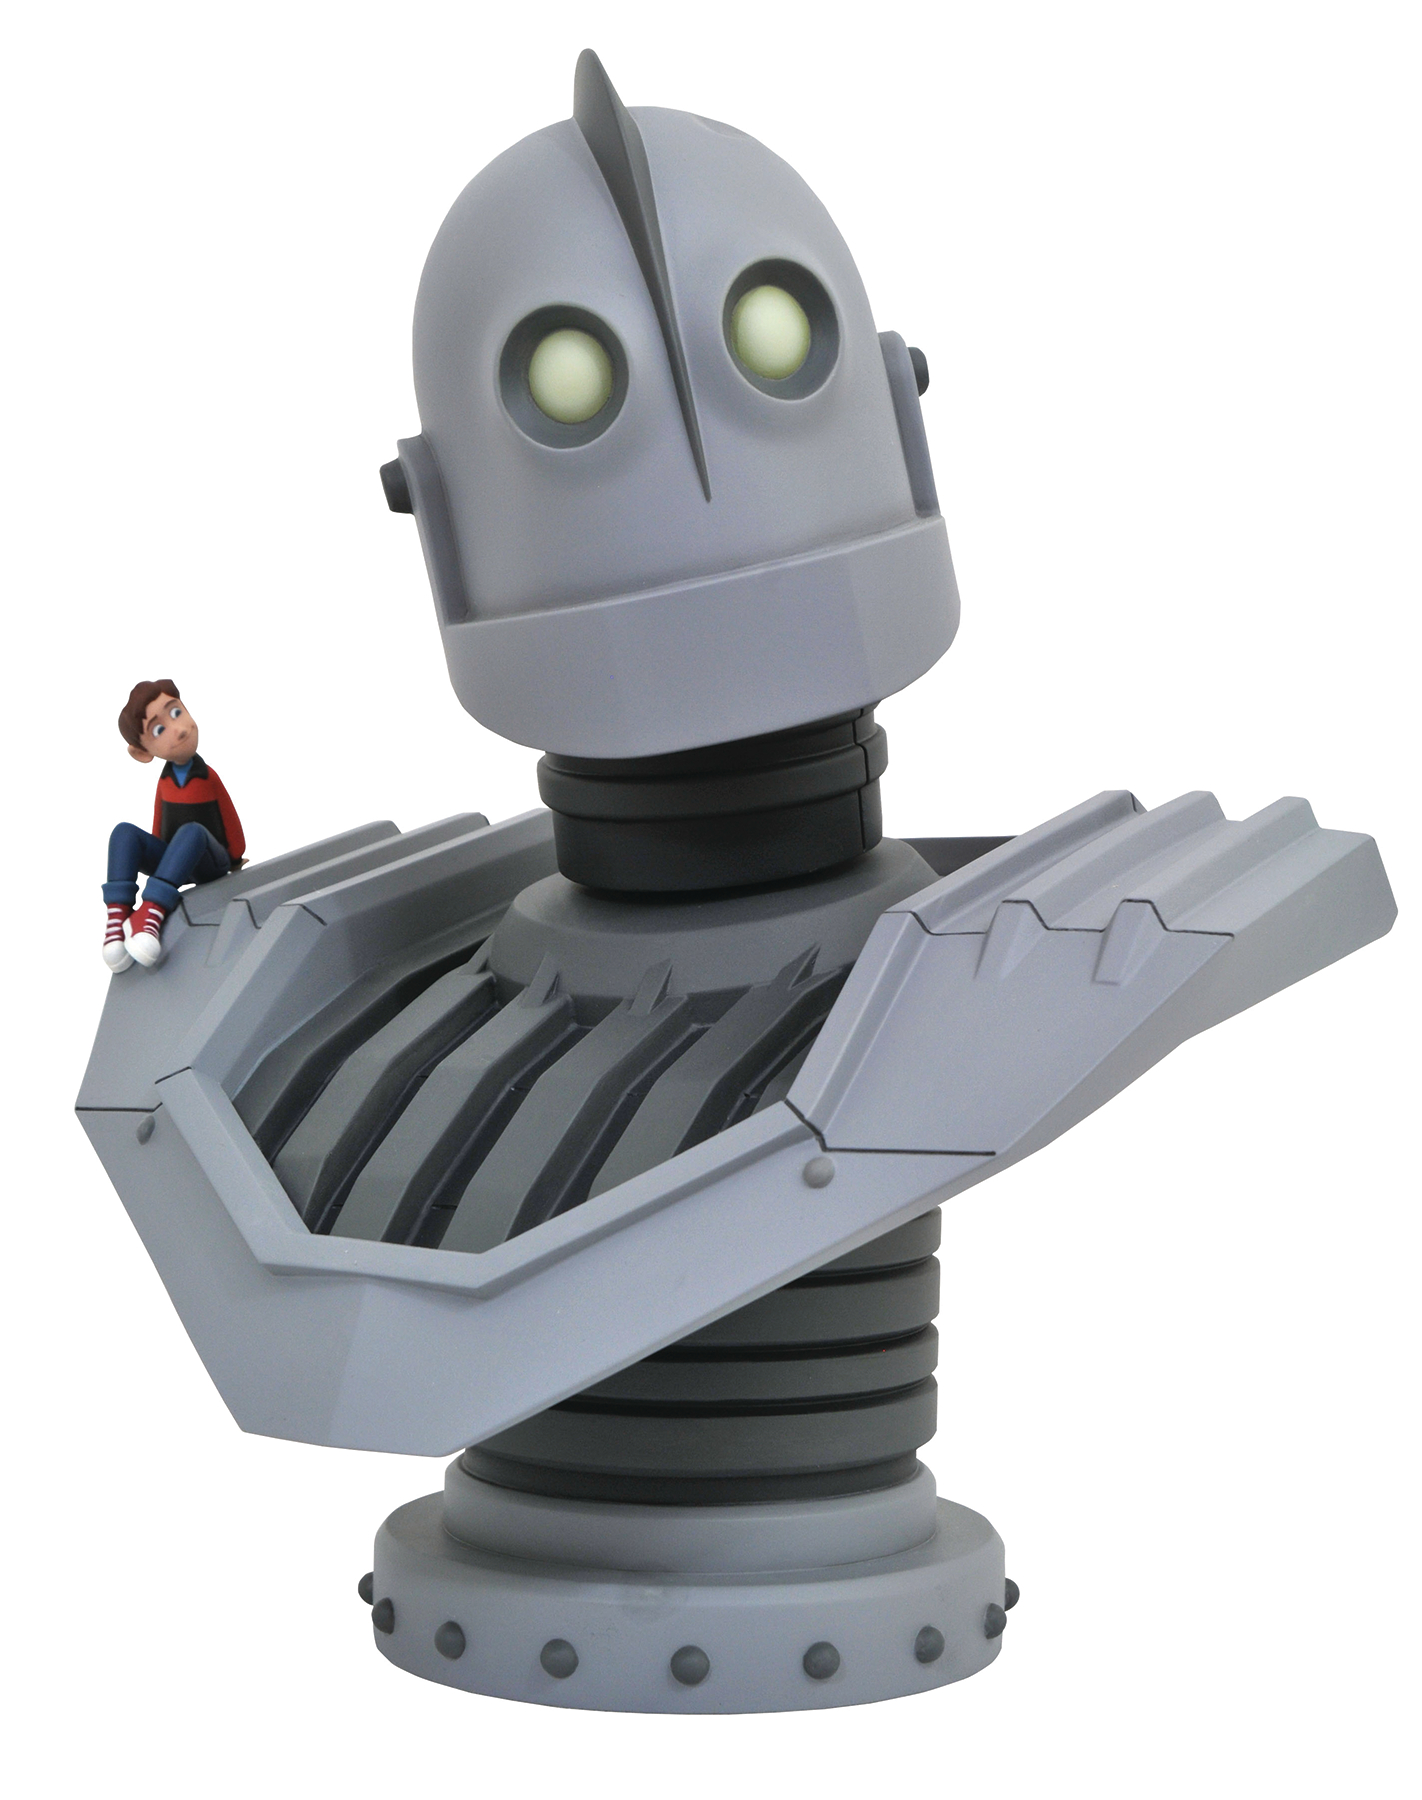 SEP182331 - LEGENDS IN 3D MOVIE IRON GIANT 1/2 SCALE BUST - Previews World